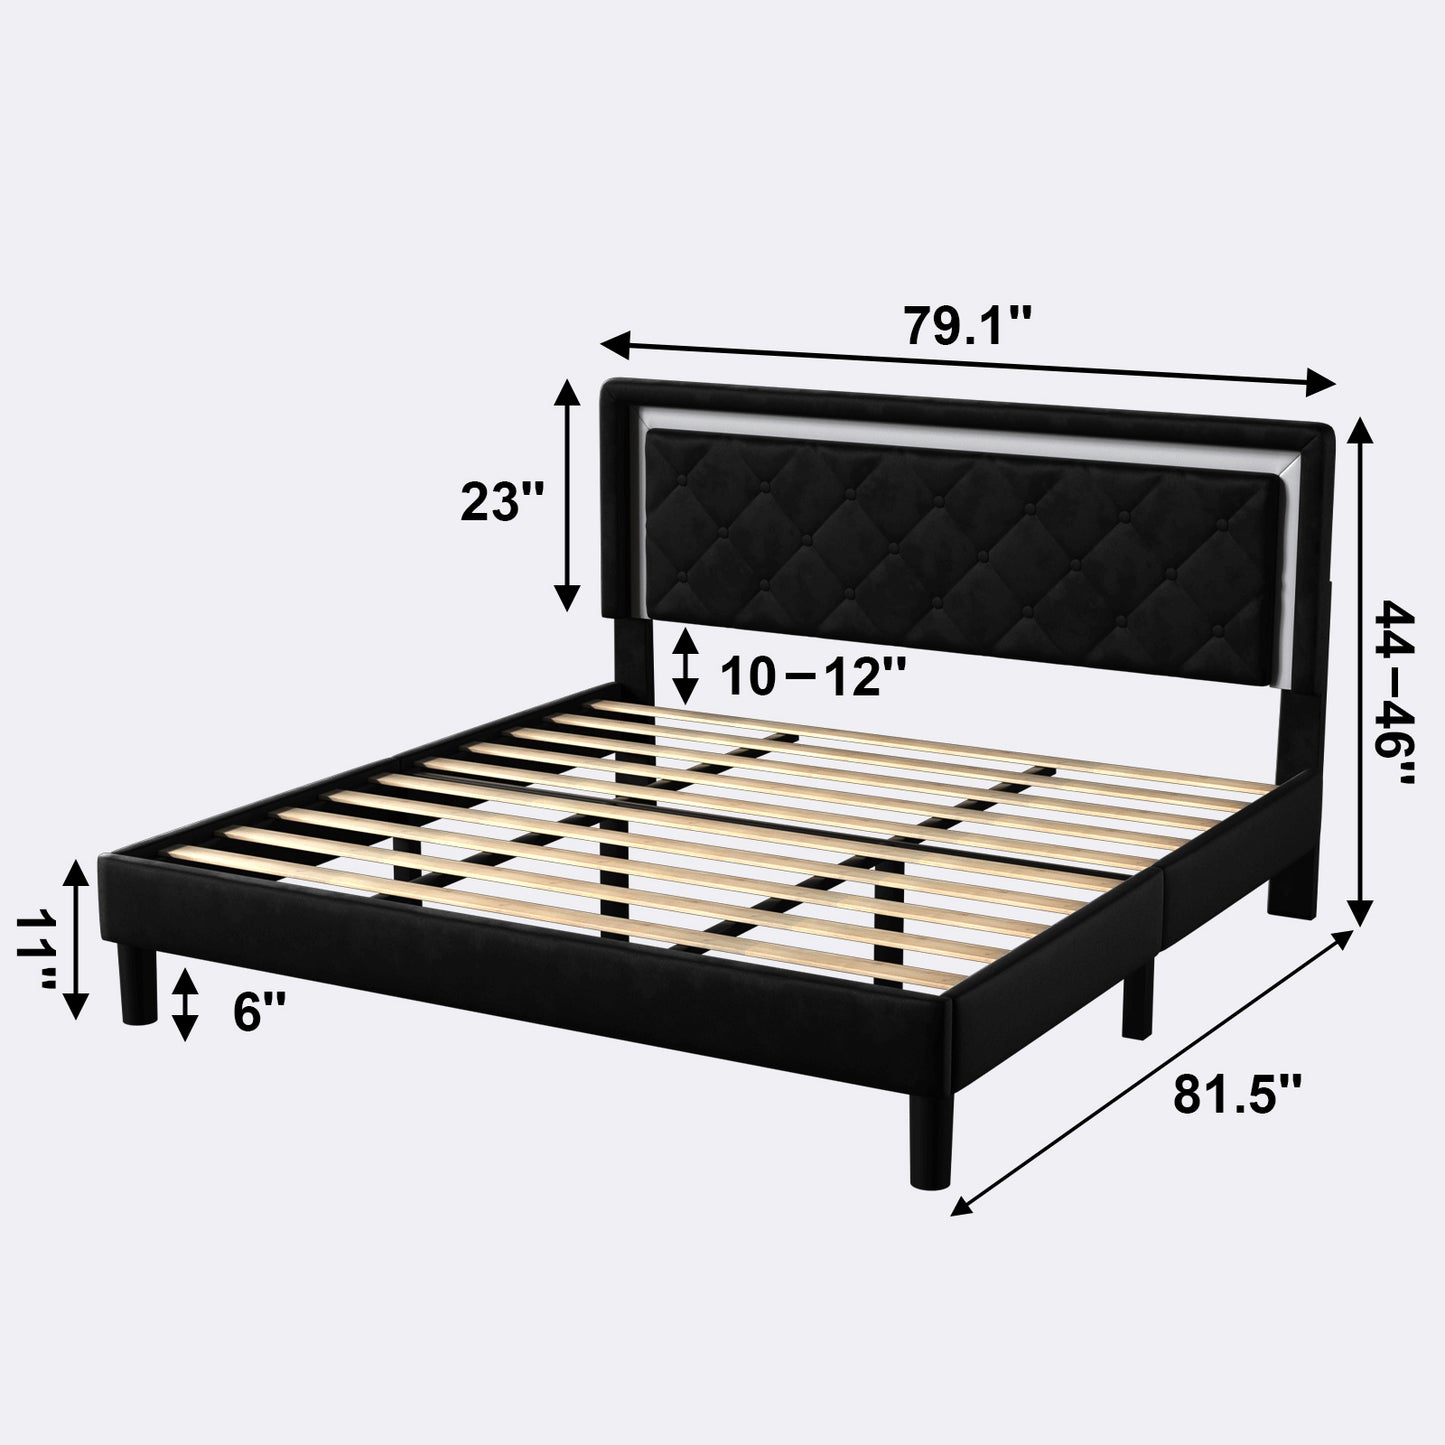 Molblly King Size Platform Bed Frame with Upholstered Headboard, Strong Frame, and Wooden Slats Support, Non-Slip, and Noise-Free, No Box Spring Needed, Easy Assembly, black